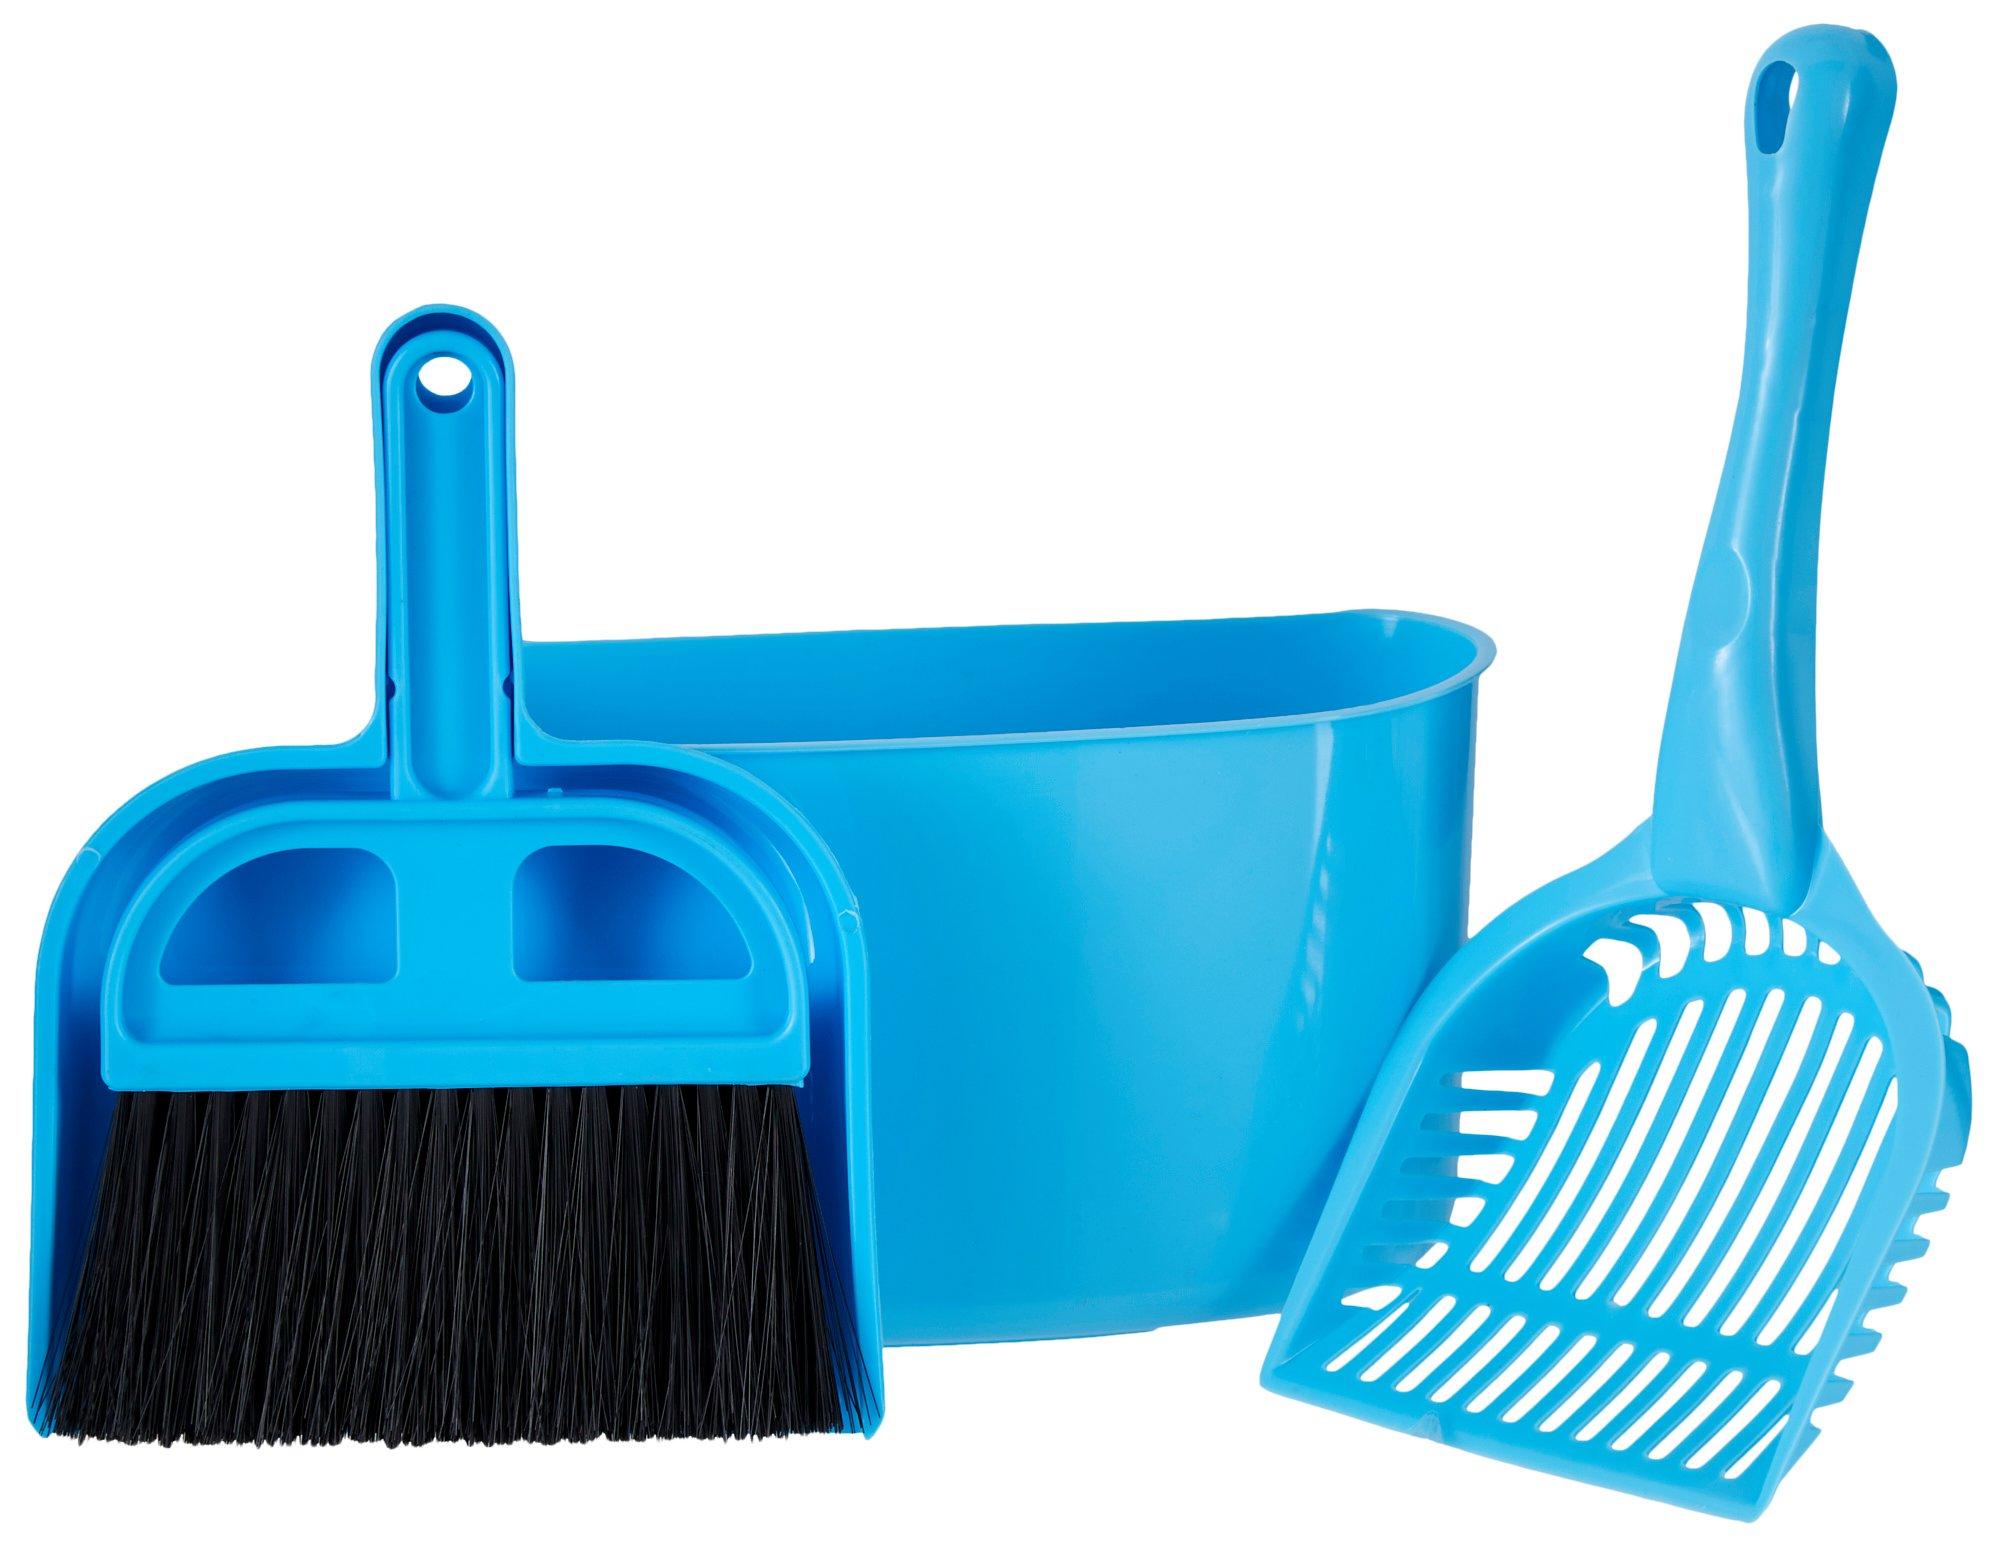 4 Pc Deluxe Cleanup Kit For Pets